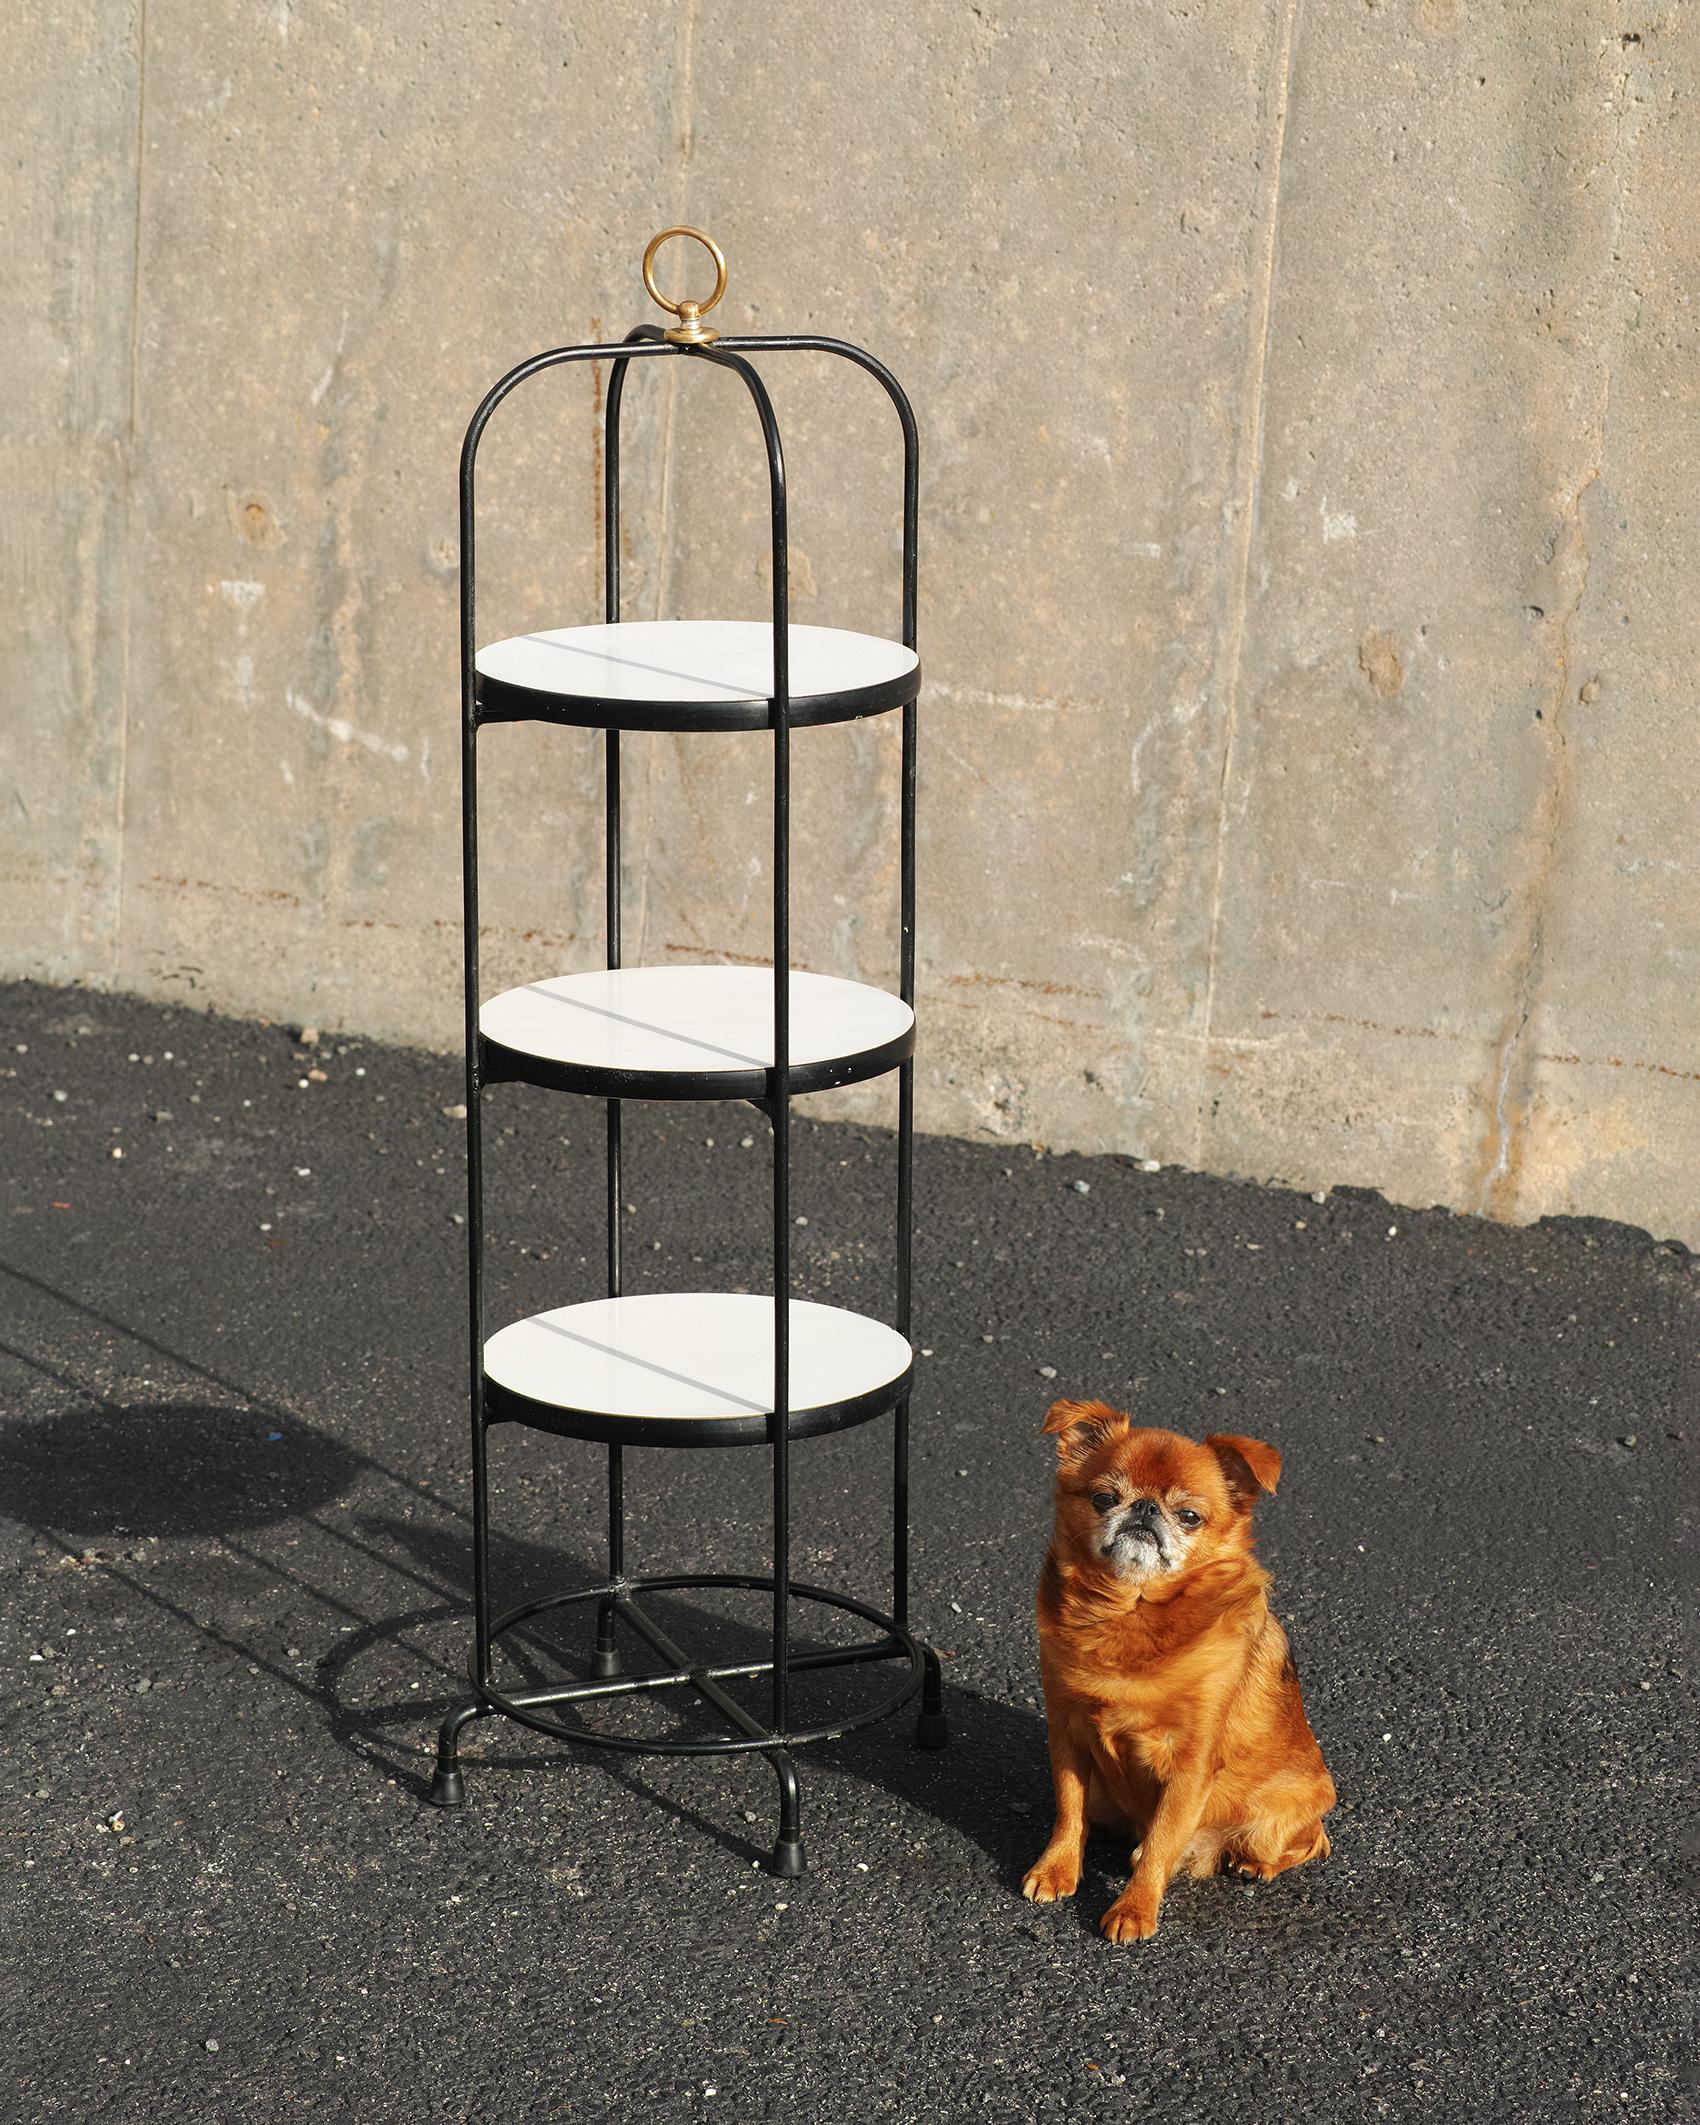 For your consideration is this midcentury American 3-tier etagere featuring a metal tube welded frame with black finish, three 11.75